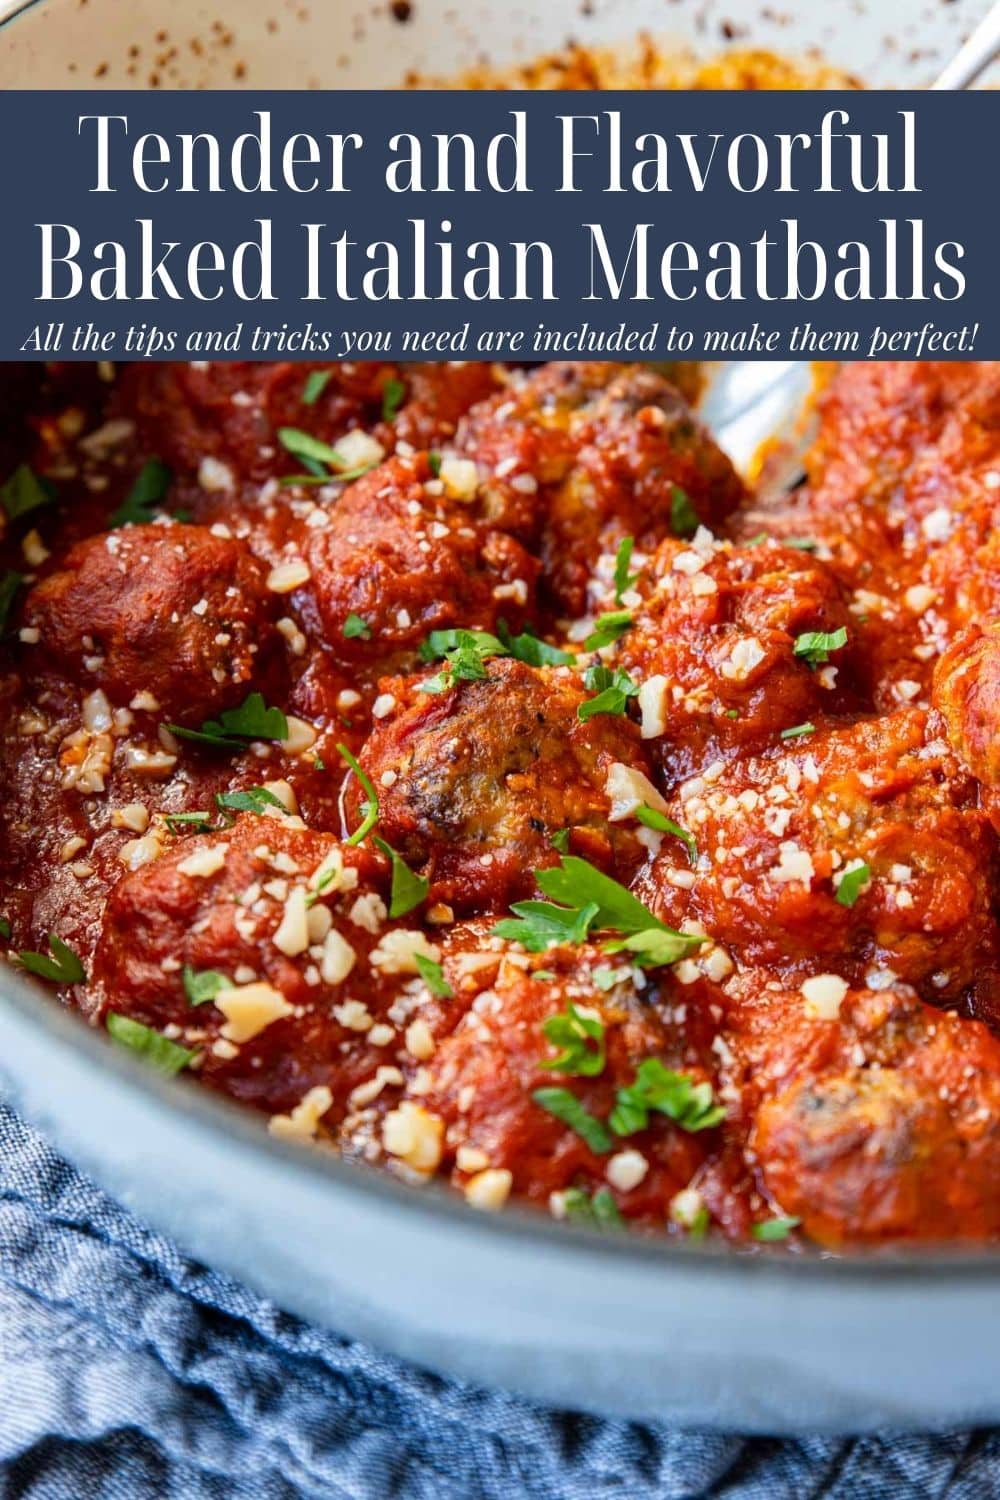 A pot of baked Italian meatballs with text overlay for Pinterest